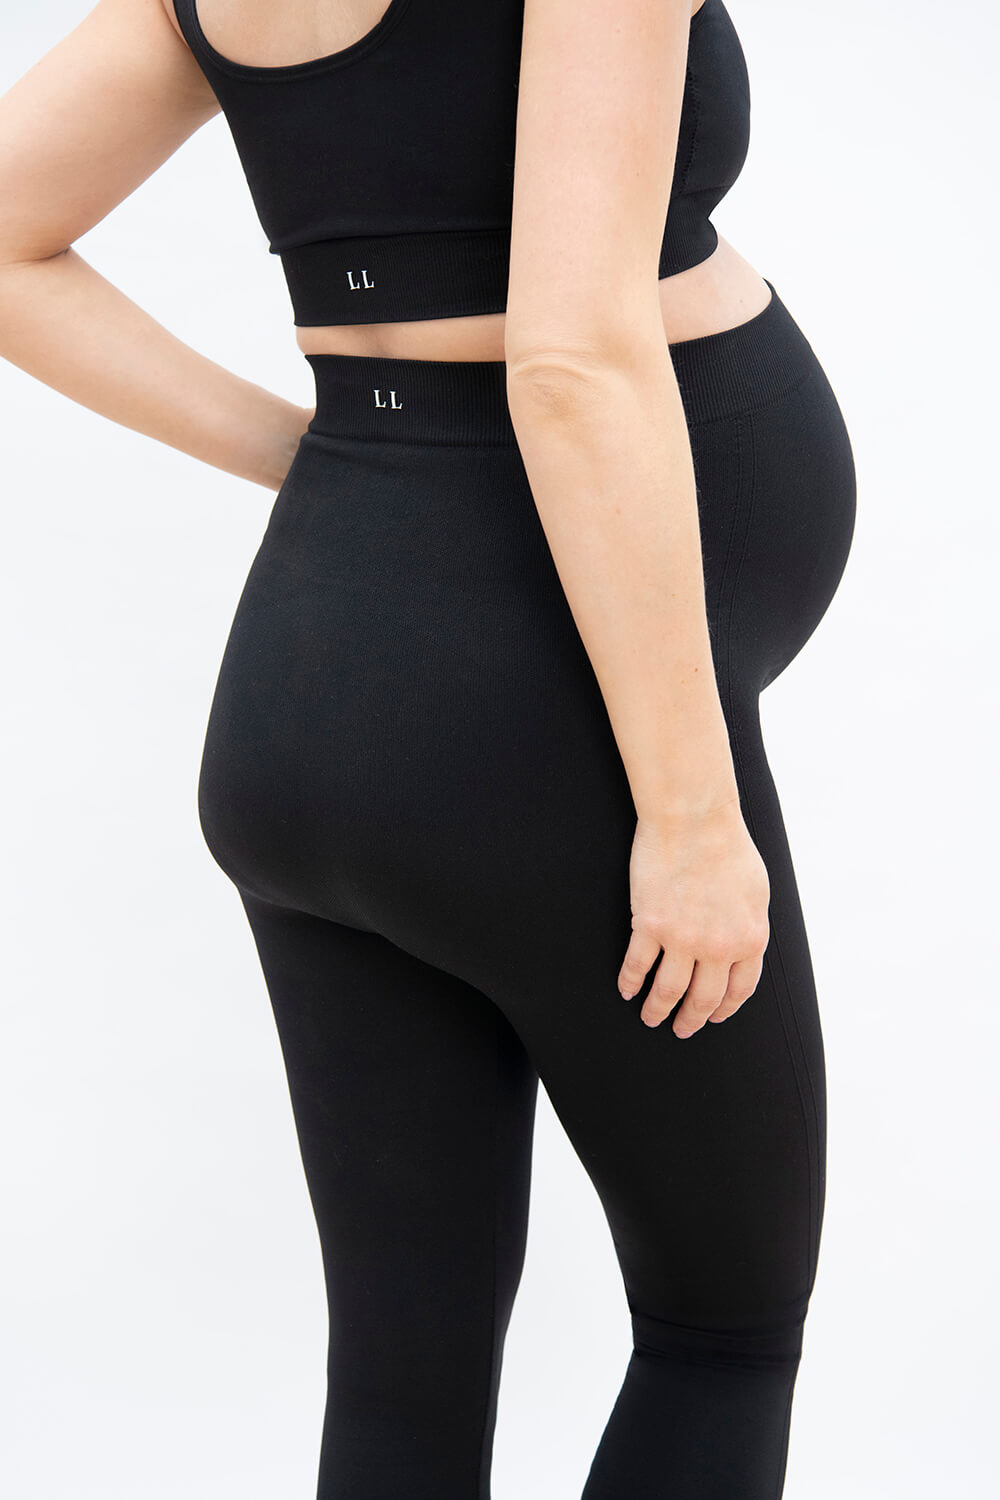 The 12 best maternity leggings of 2023, according to reviews